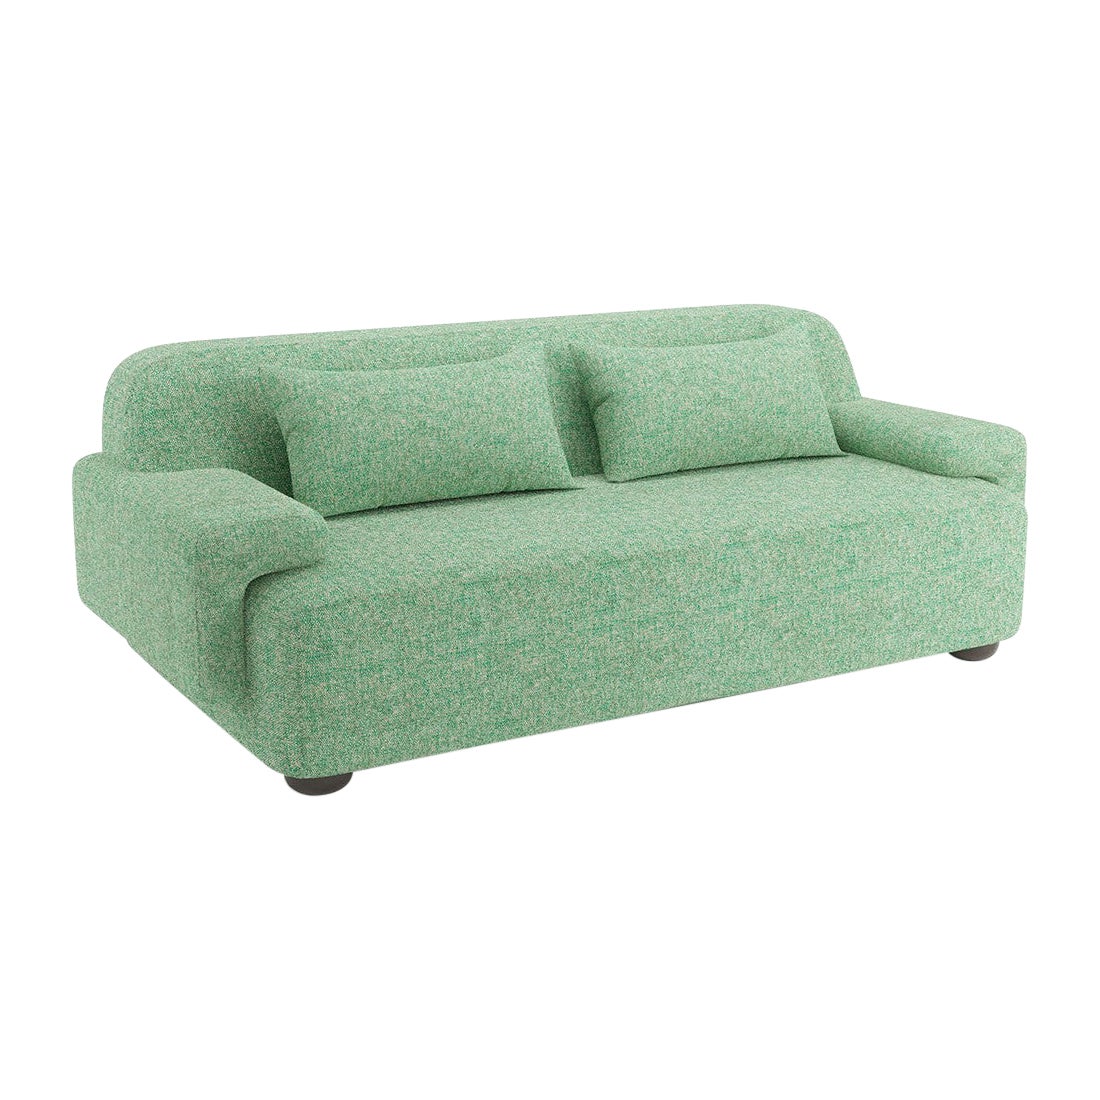 Popus Editions Lena 3 Seater Sofa in Emerald London Linen Fabric For Sale